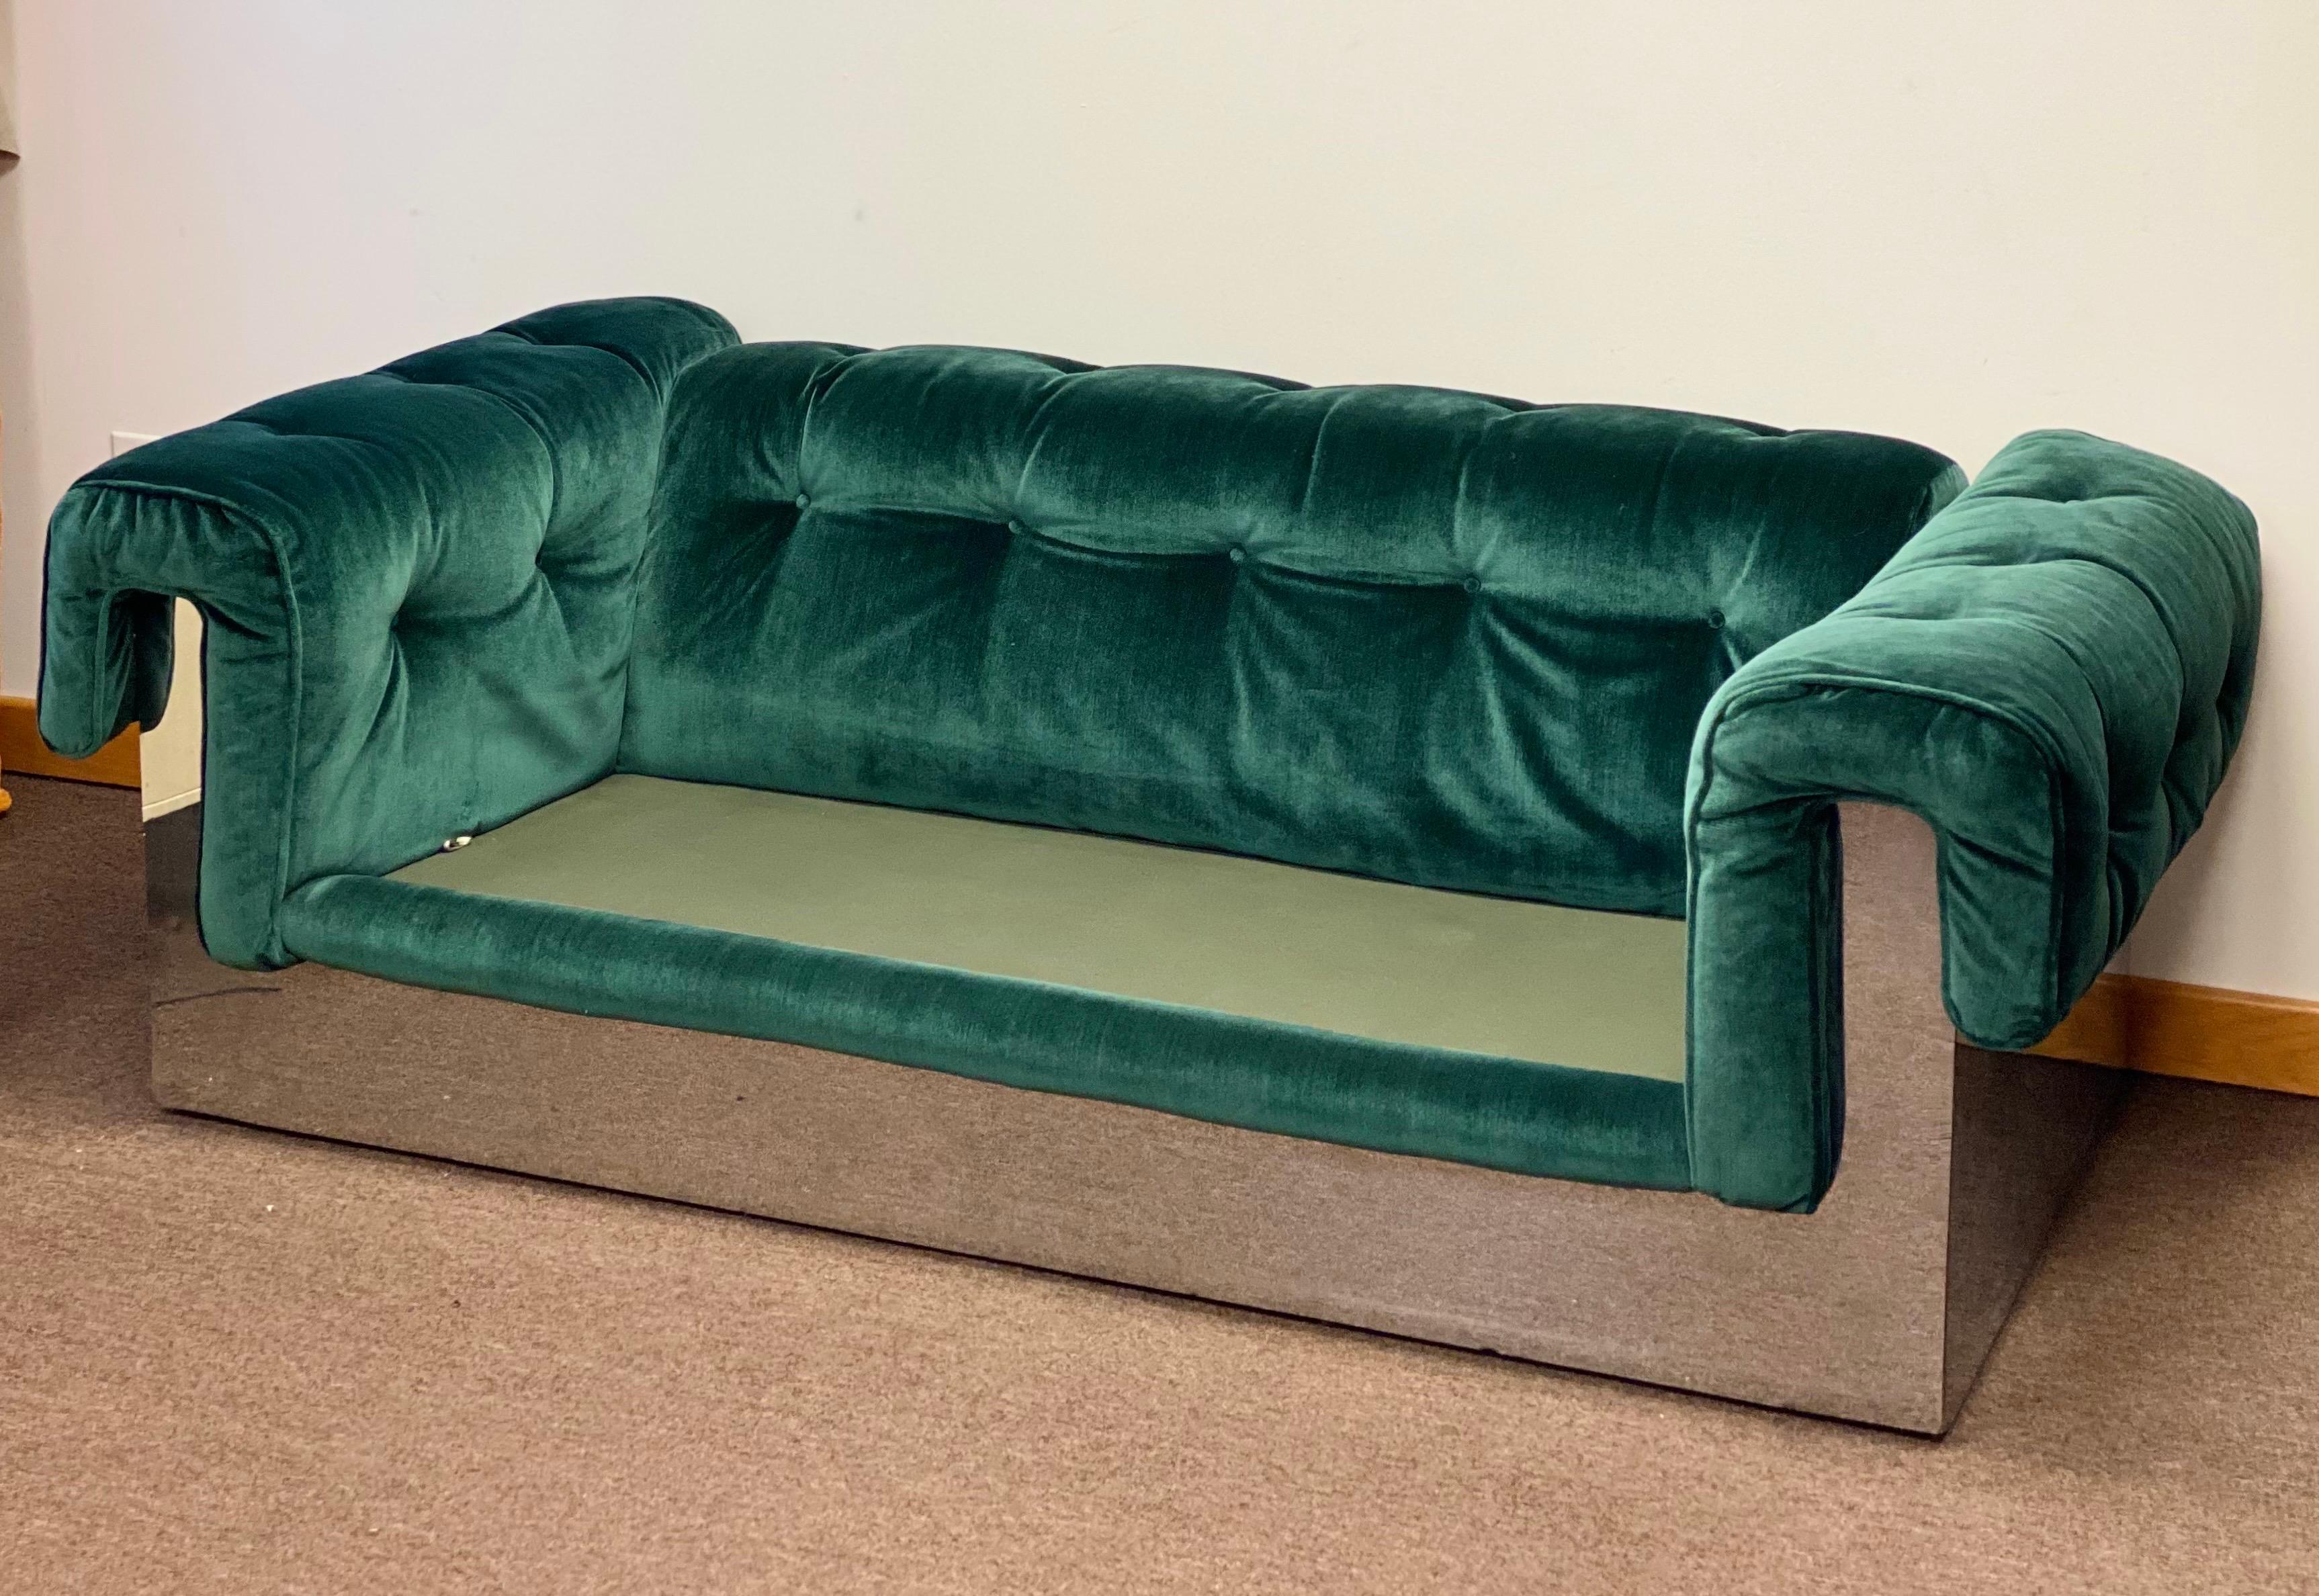 We are very pleased to offer a statement piece by modern furniture designer Milo Baughman for Thayer Coggin, circa the 1970s. A reinvented; forward-thinking chesterfield stretches out on a modern frame wrapped in a rich, emerald green velvet fabric.